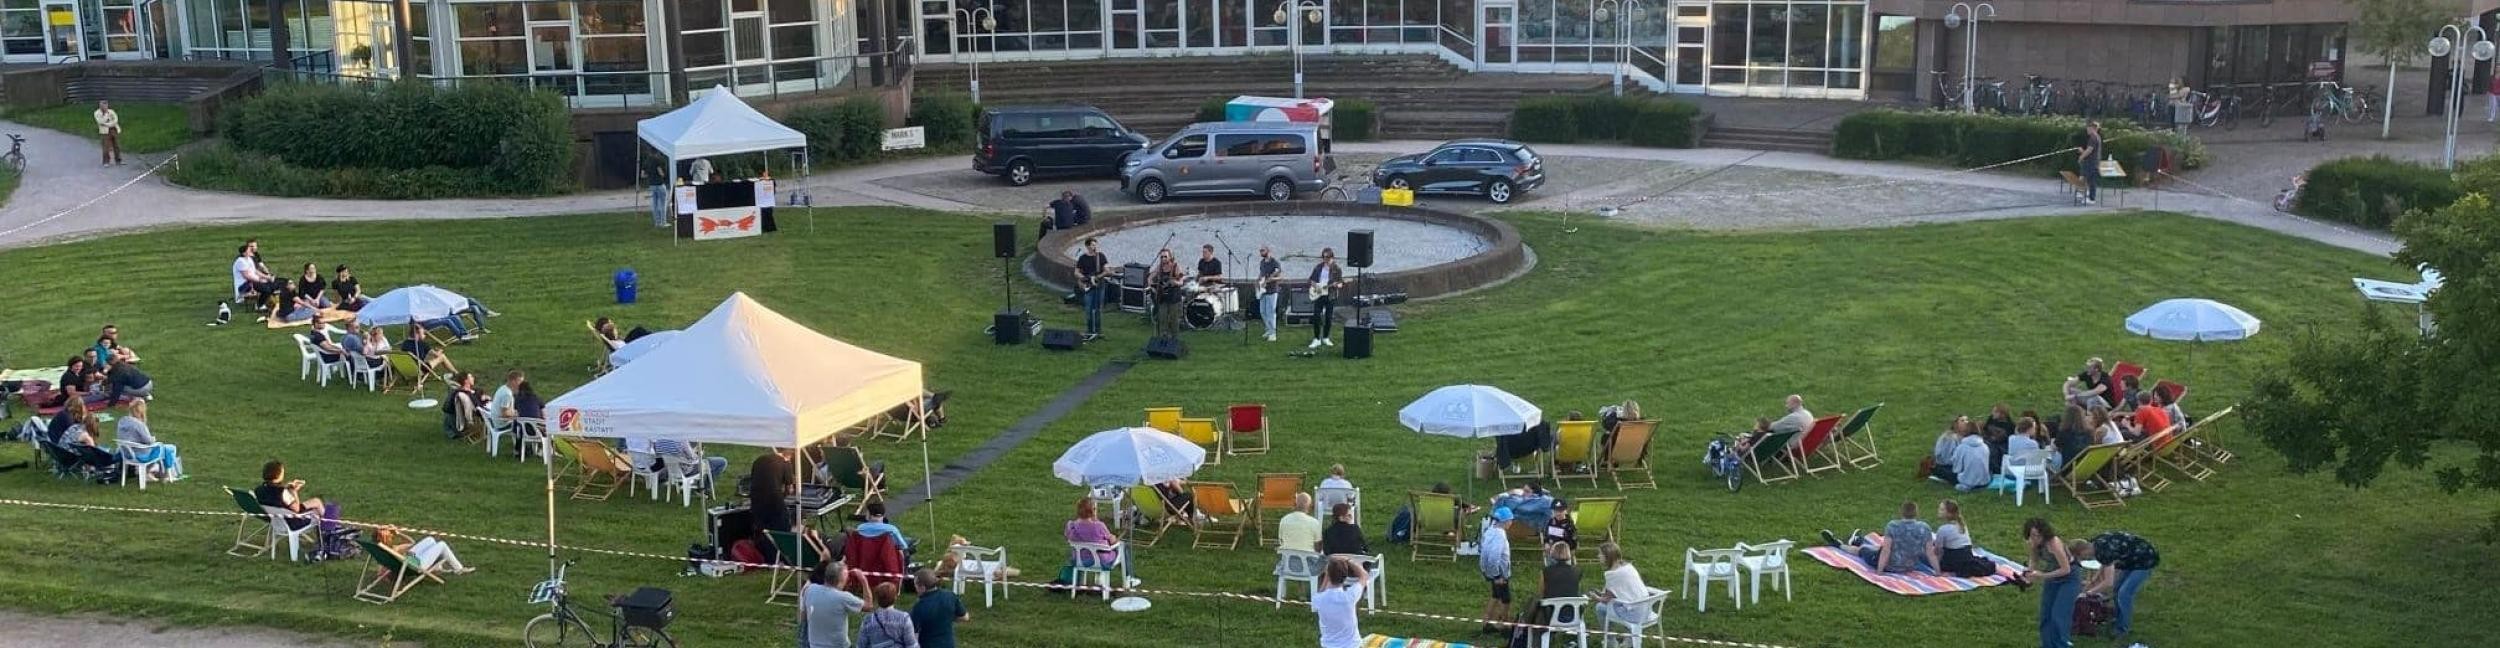 Murgchillout Rastatt - On a meadow many people sit on deck chairs, in front of it a band plays music, in the background buildings